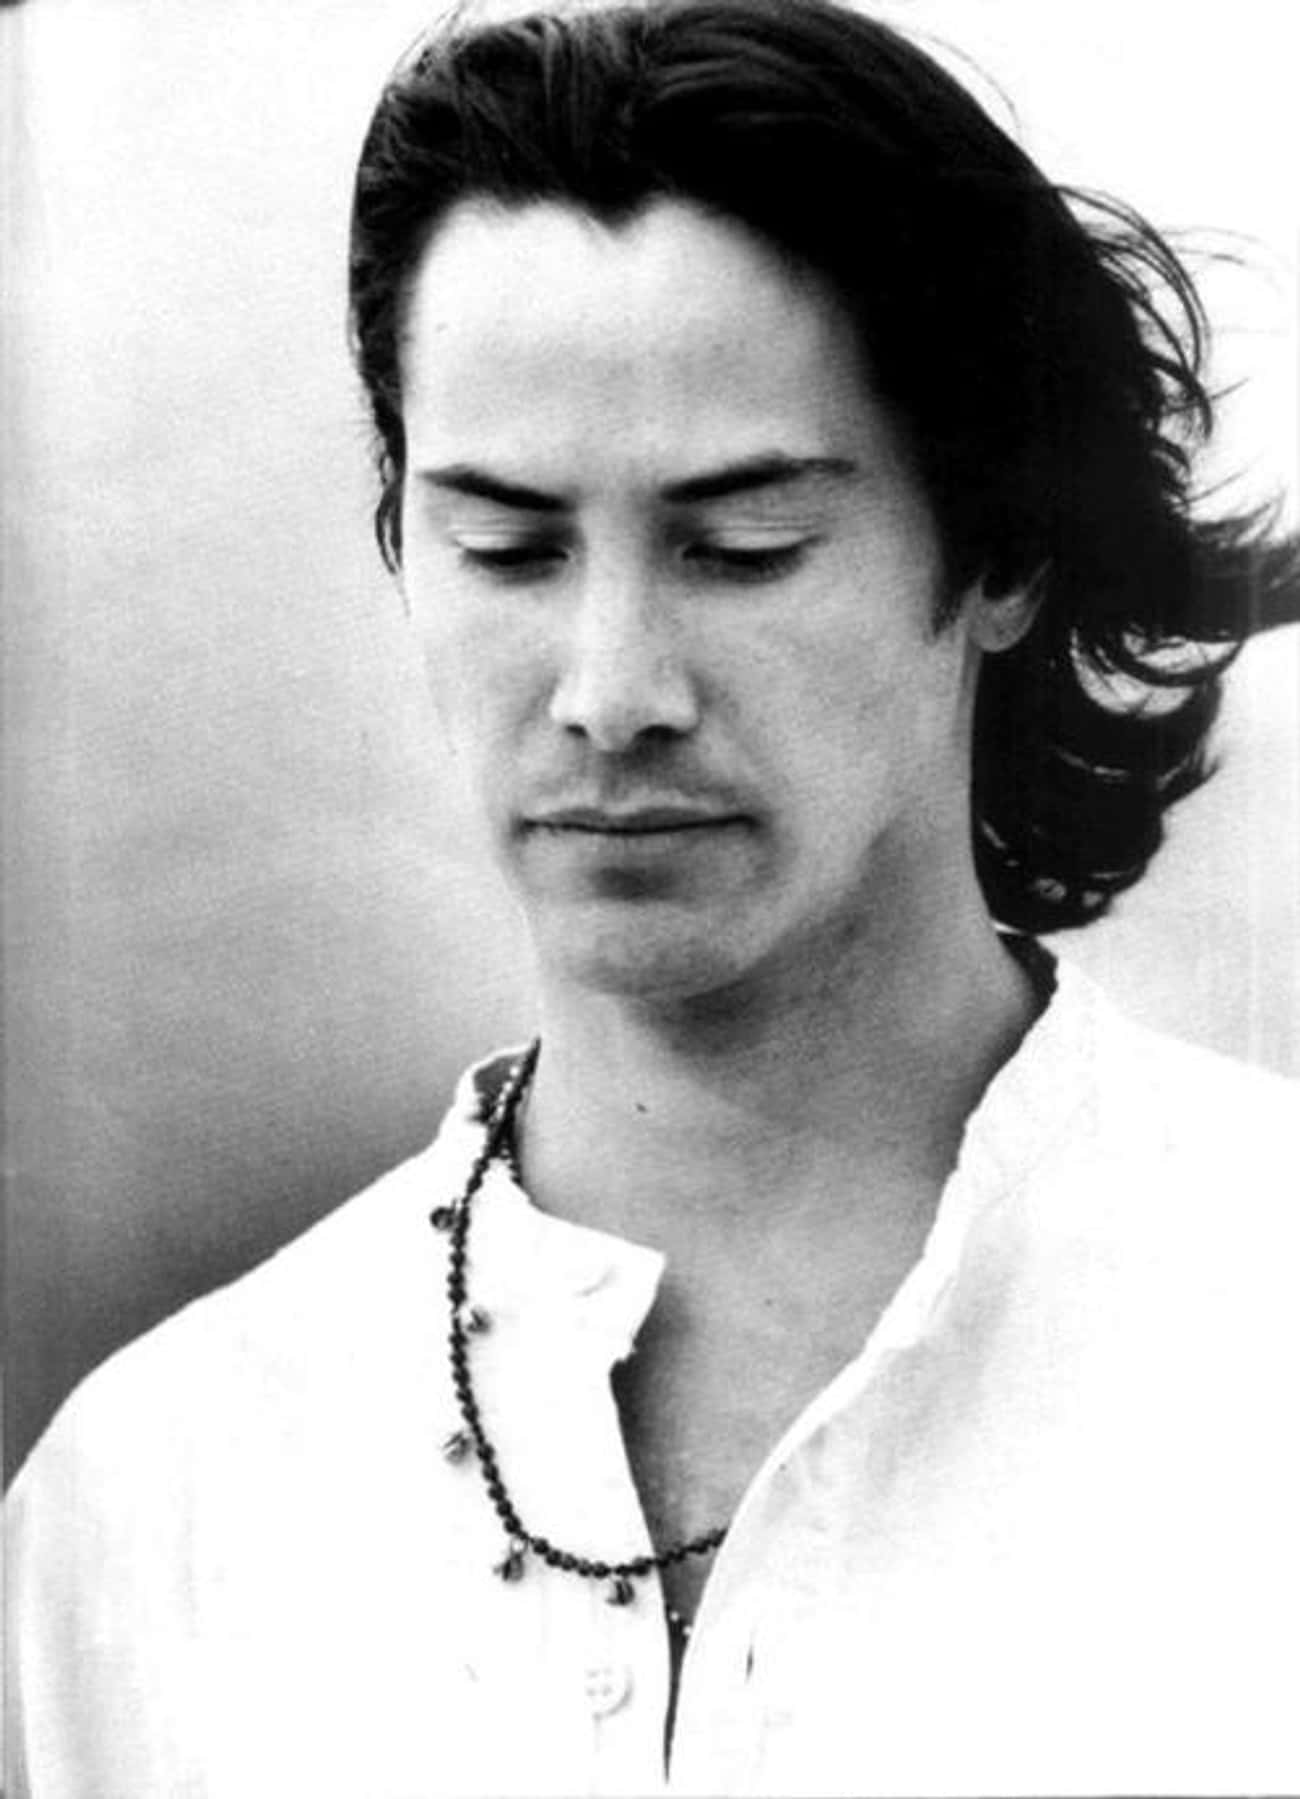 Young Keanu Reeves in White Buttondown